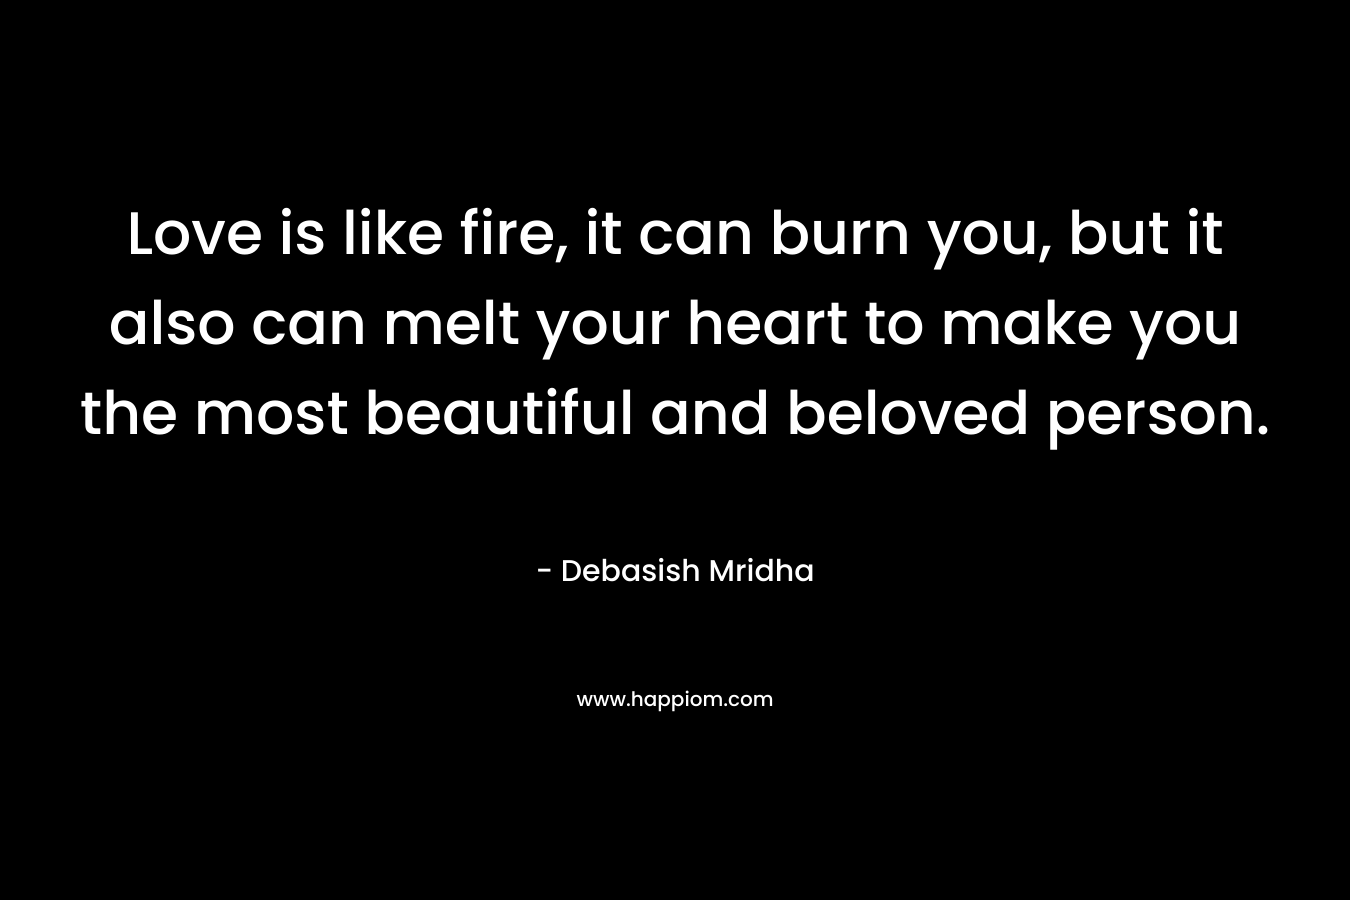 Love is like fire, it can burn you, but it also can melt your heart to make you the most beautiful and beloved person.